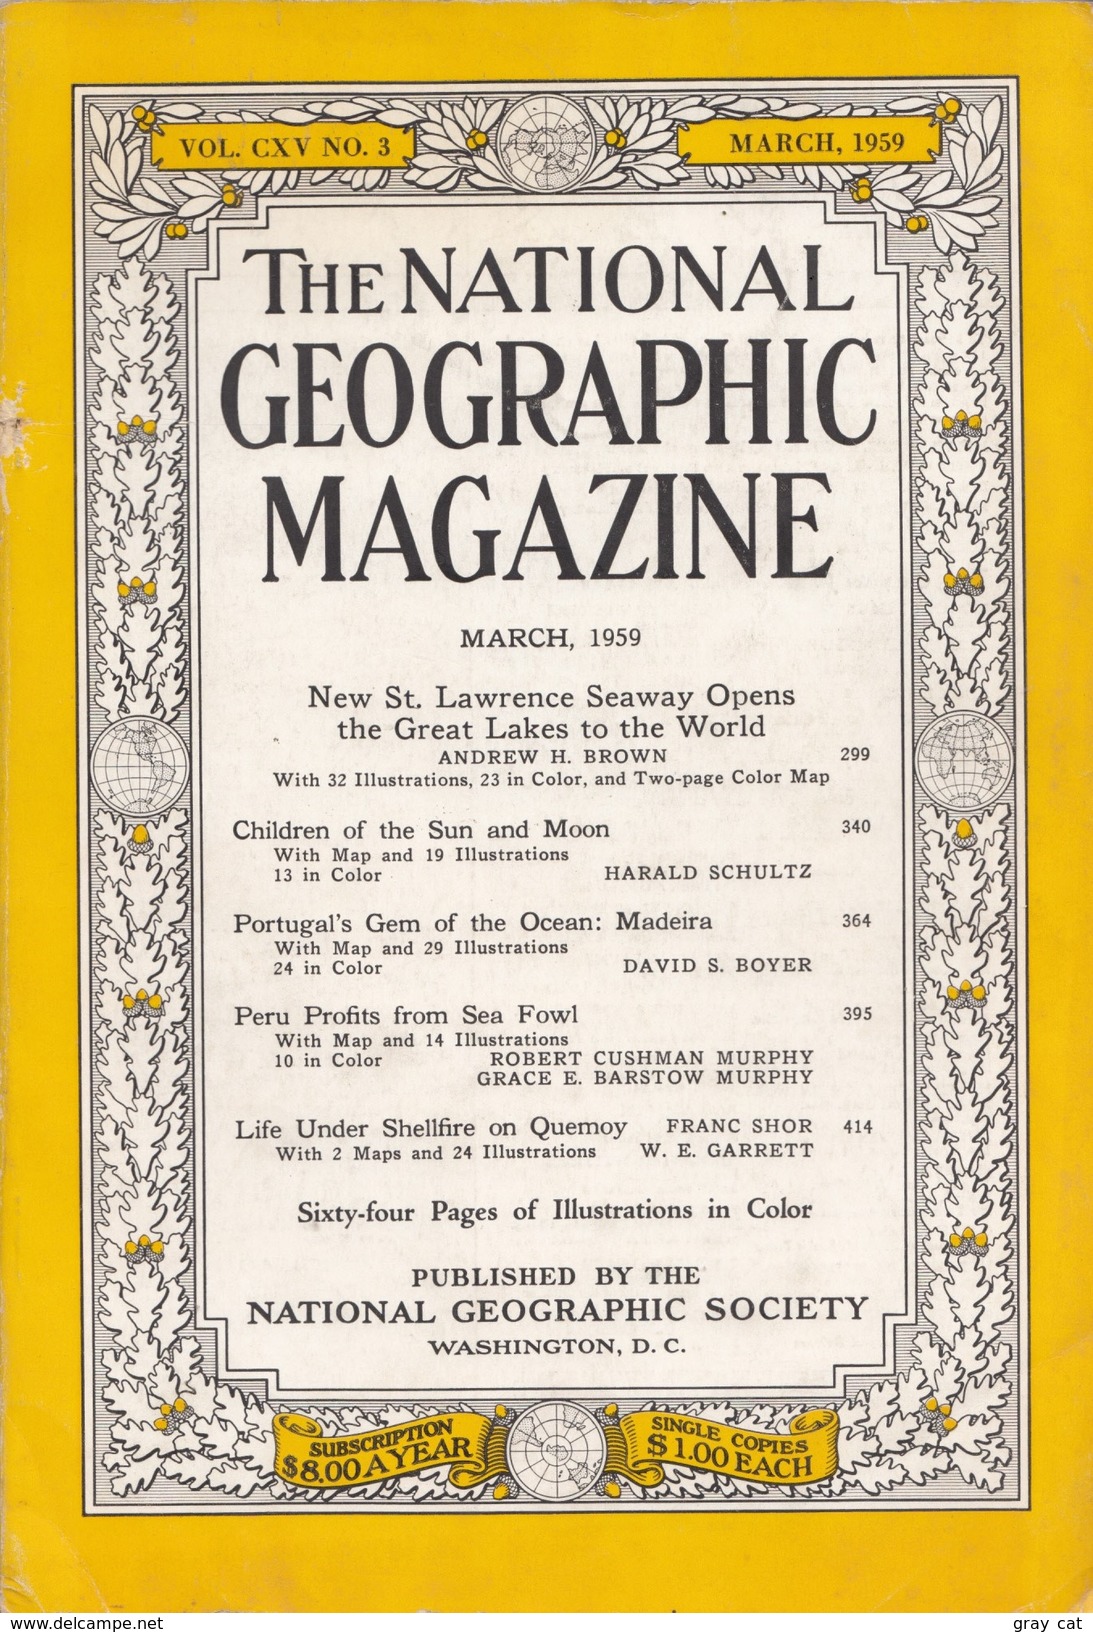 National Geographic Vol. CXV, No. 3, March 1959 - Travel/ Exploration